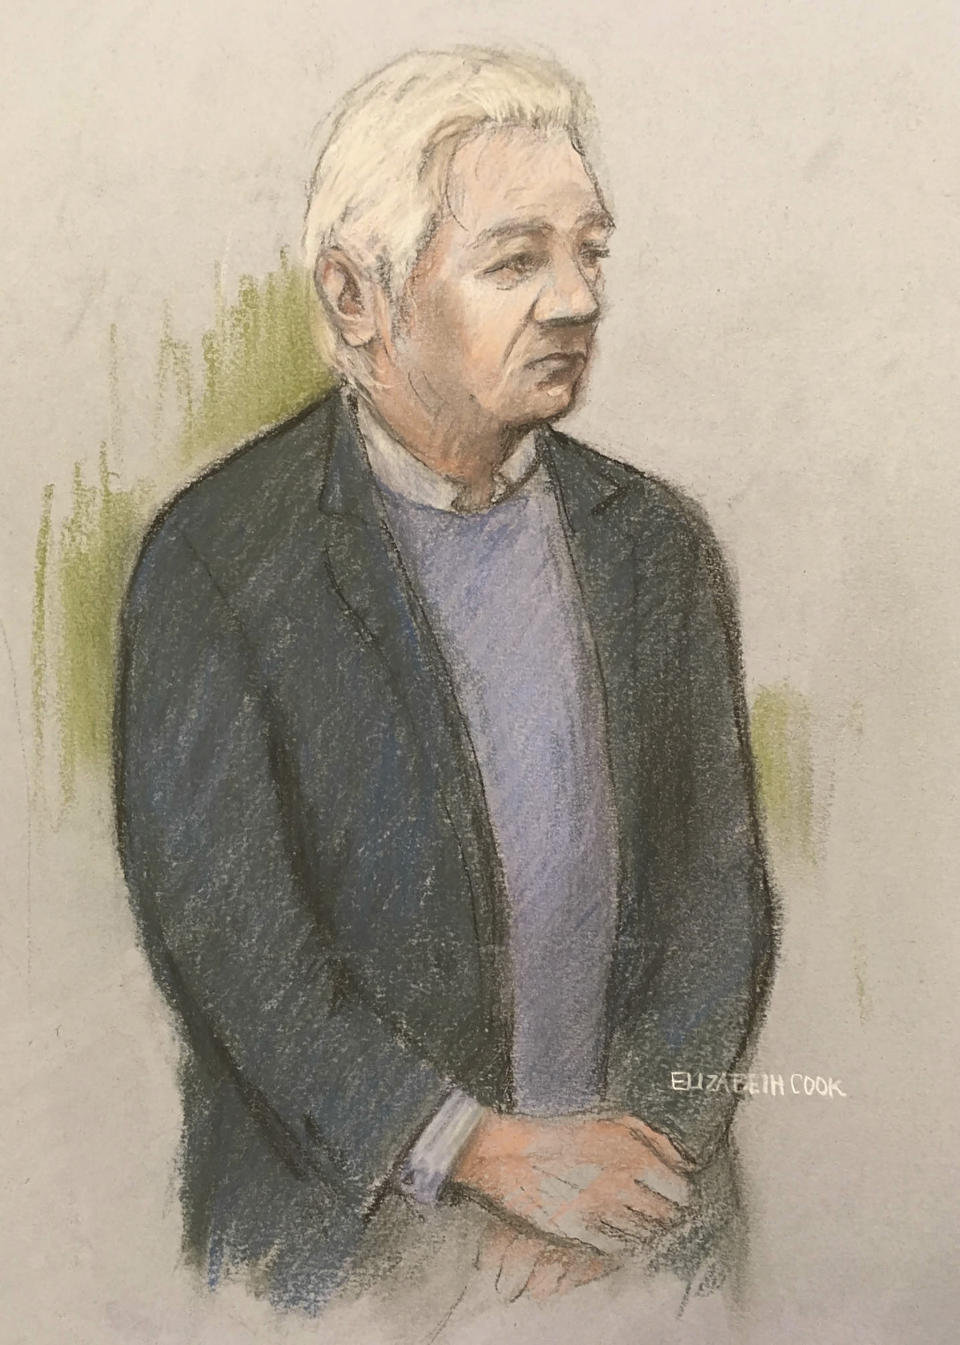 Courts artist sketch by Elizabeth Cook showing Julian Assange as he appeared at Westminster Magistrates' Court in London Monday Oct. 21, 2019, for a hearing related to his extradition to the United States. WikiLeaks founder Julian Assange appeared in court Monday to fight extradition to the United States on charges of espionage, with the full extradition hearing set for February 2020. (Elizabeth Cook/PA via AP)